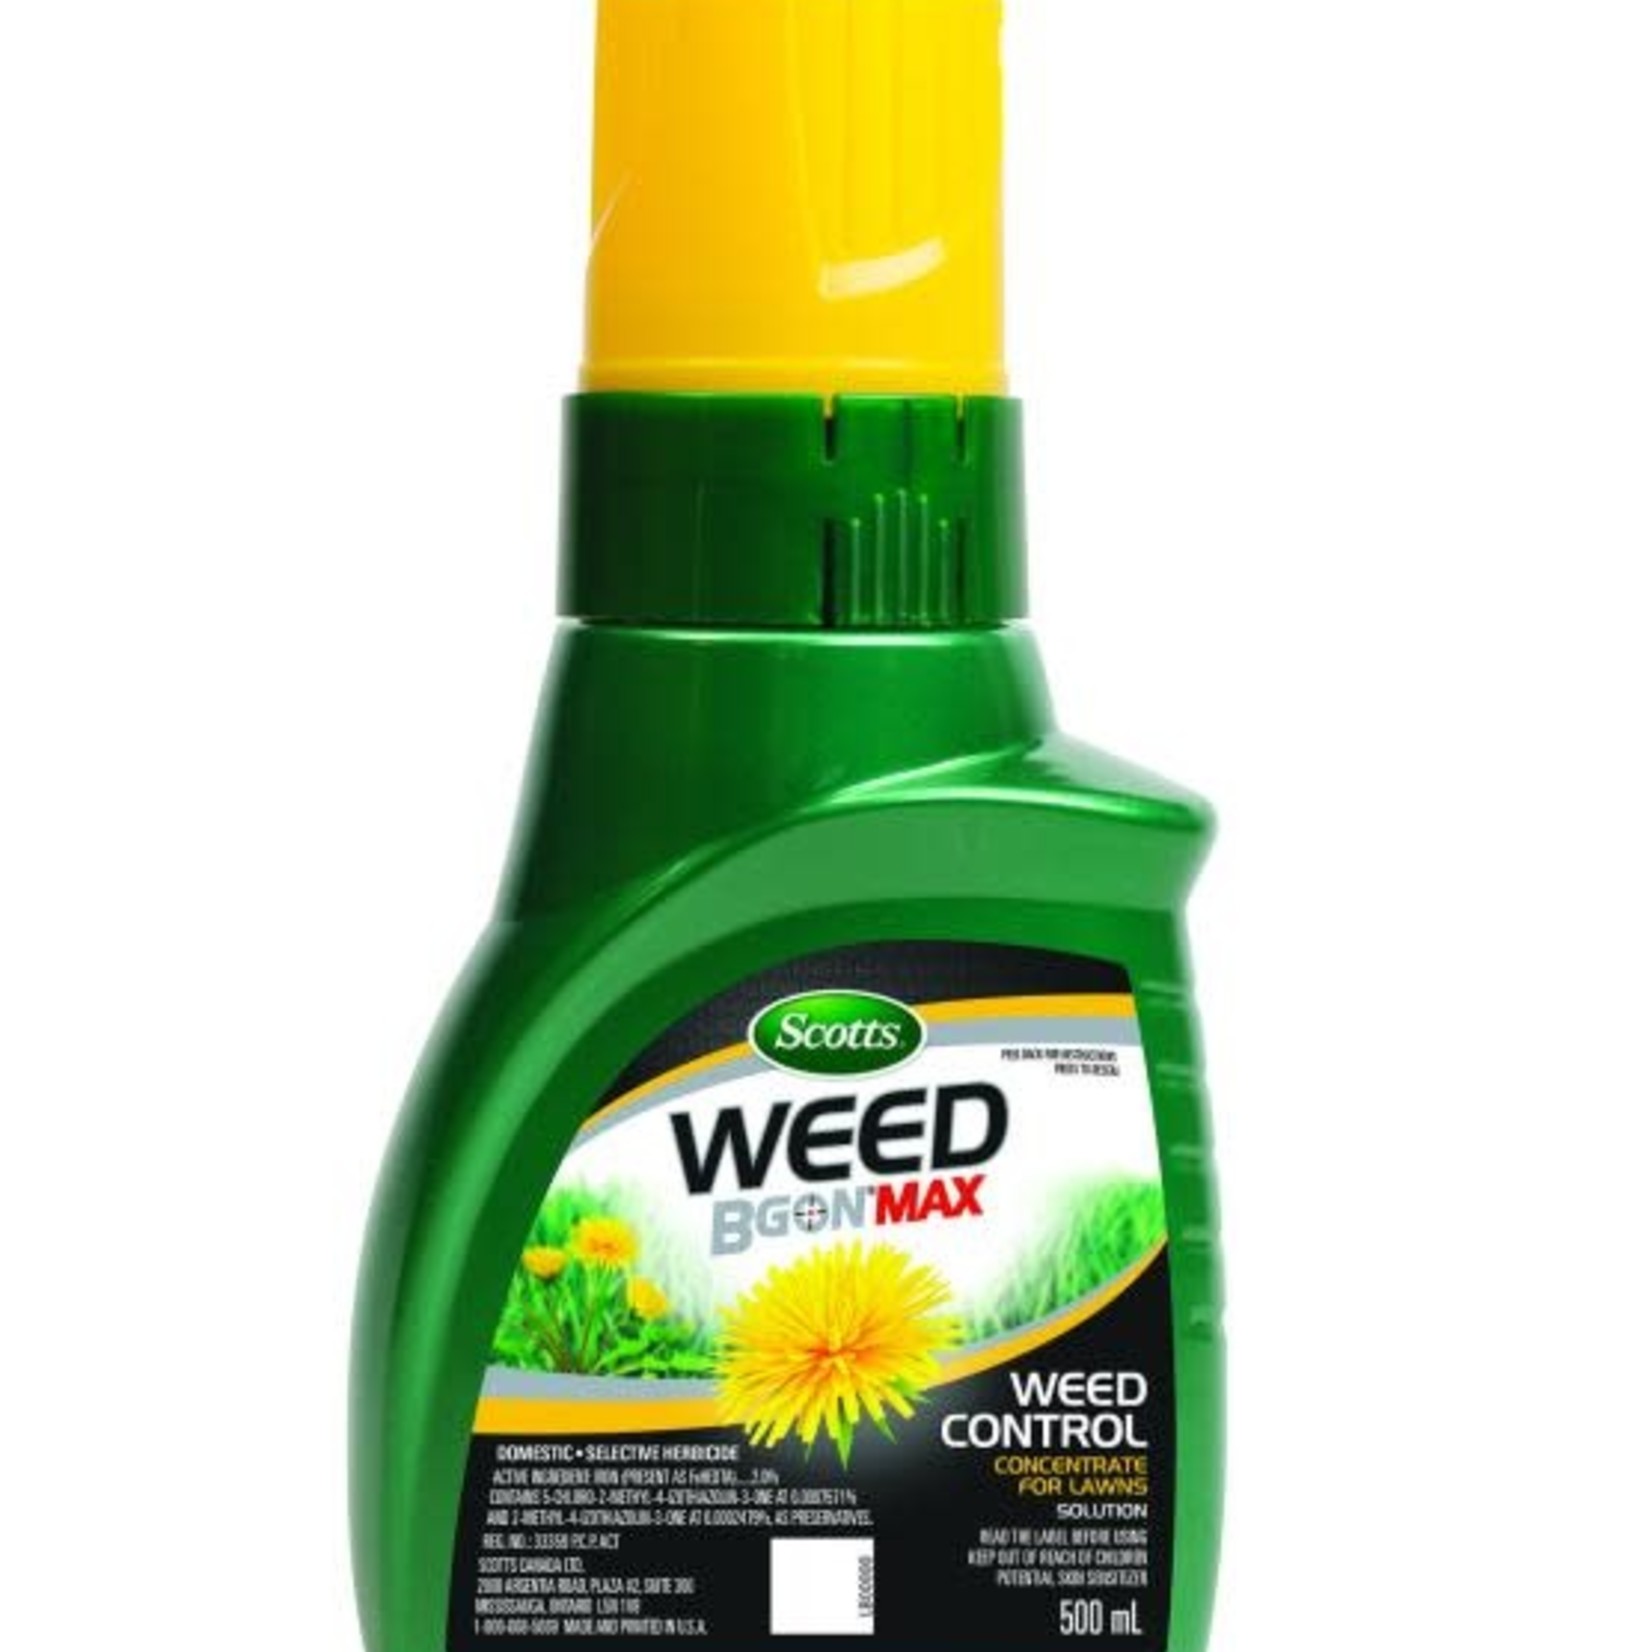 Scotts Weed B Gon Max Weed Control Concentrate for Lawns  500mL